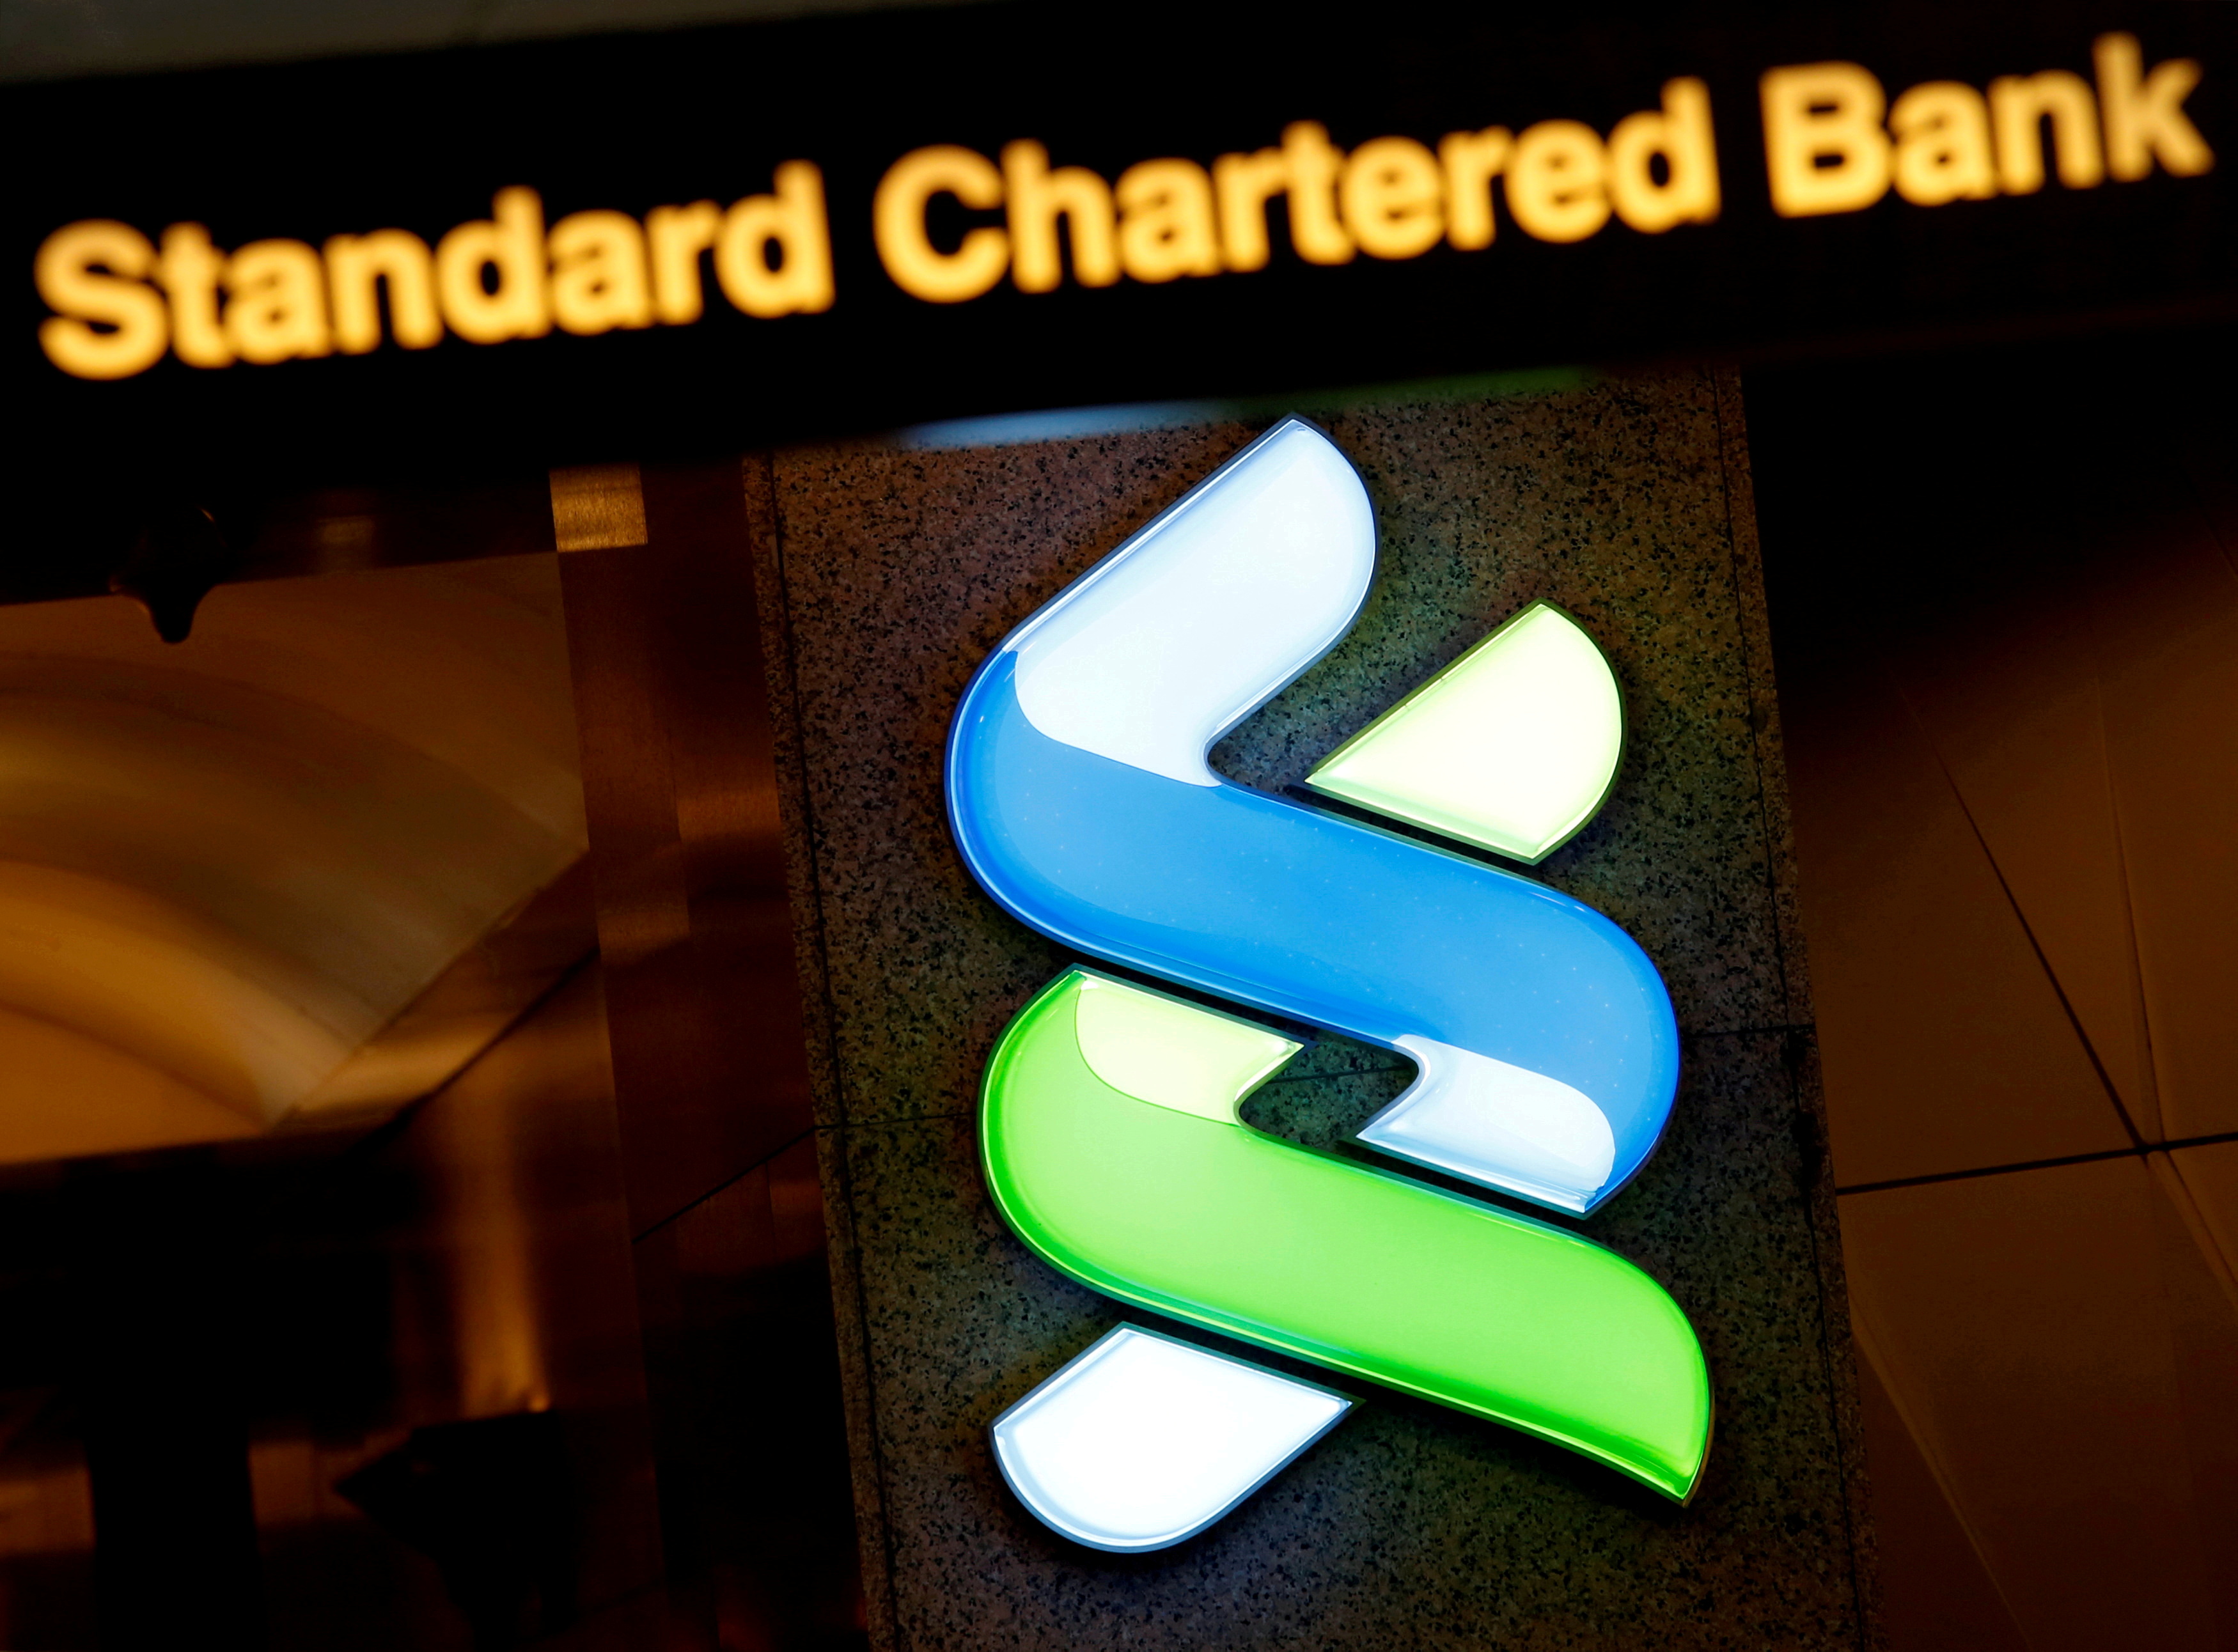 A logo of Standard Chartered is displayed at its main branch in Hong Kong